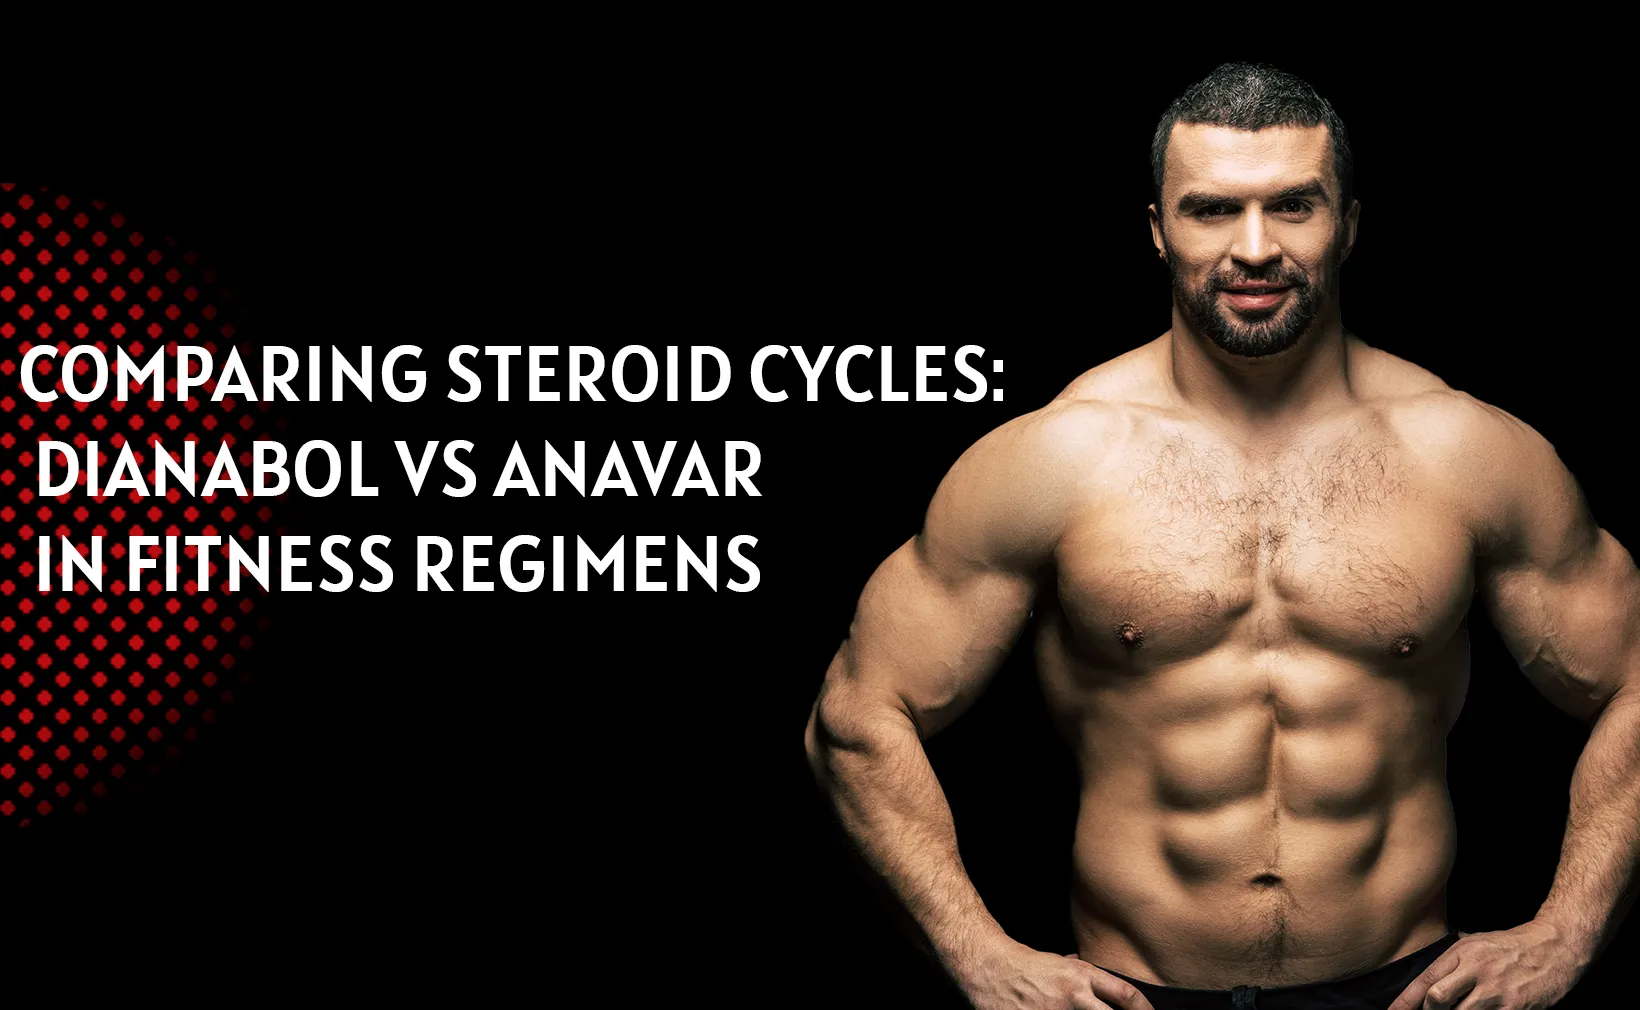 Comparing Steroid Cycles: Dianabol vs Anavar in Fitness Regimens